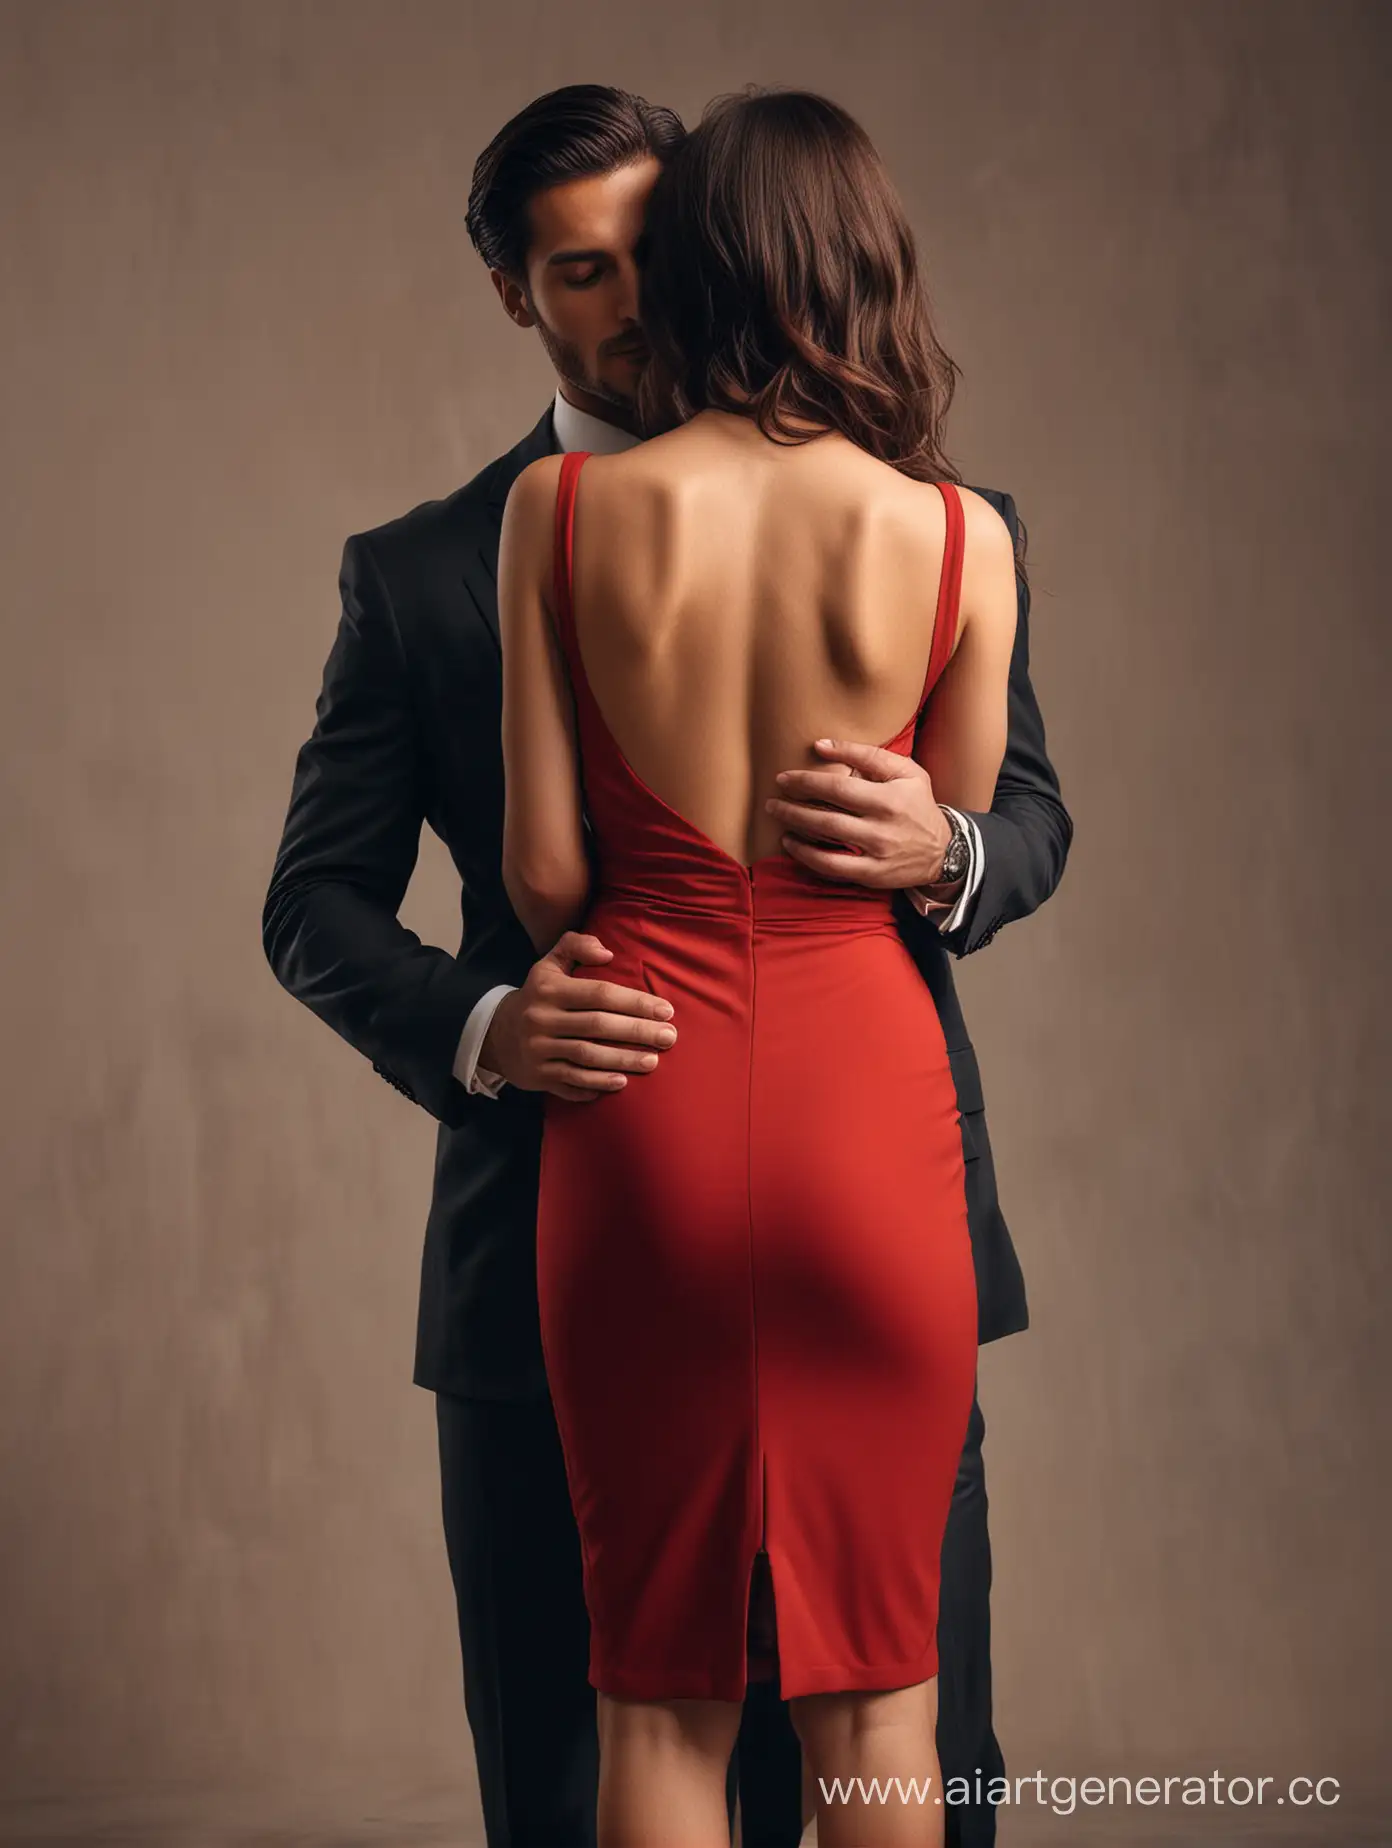 Mysterious-Embrace-Italian-Man-and-RedDressed-Woman-in-Intriguing-Style